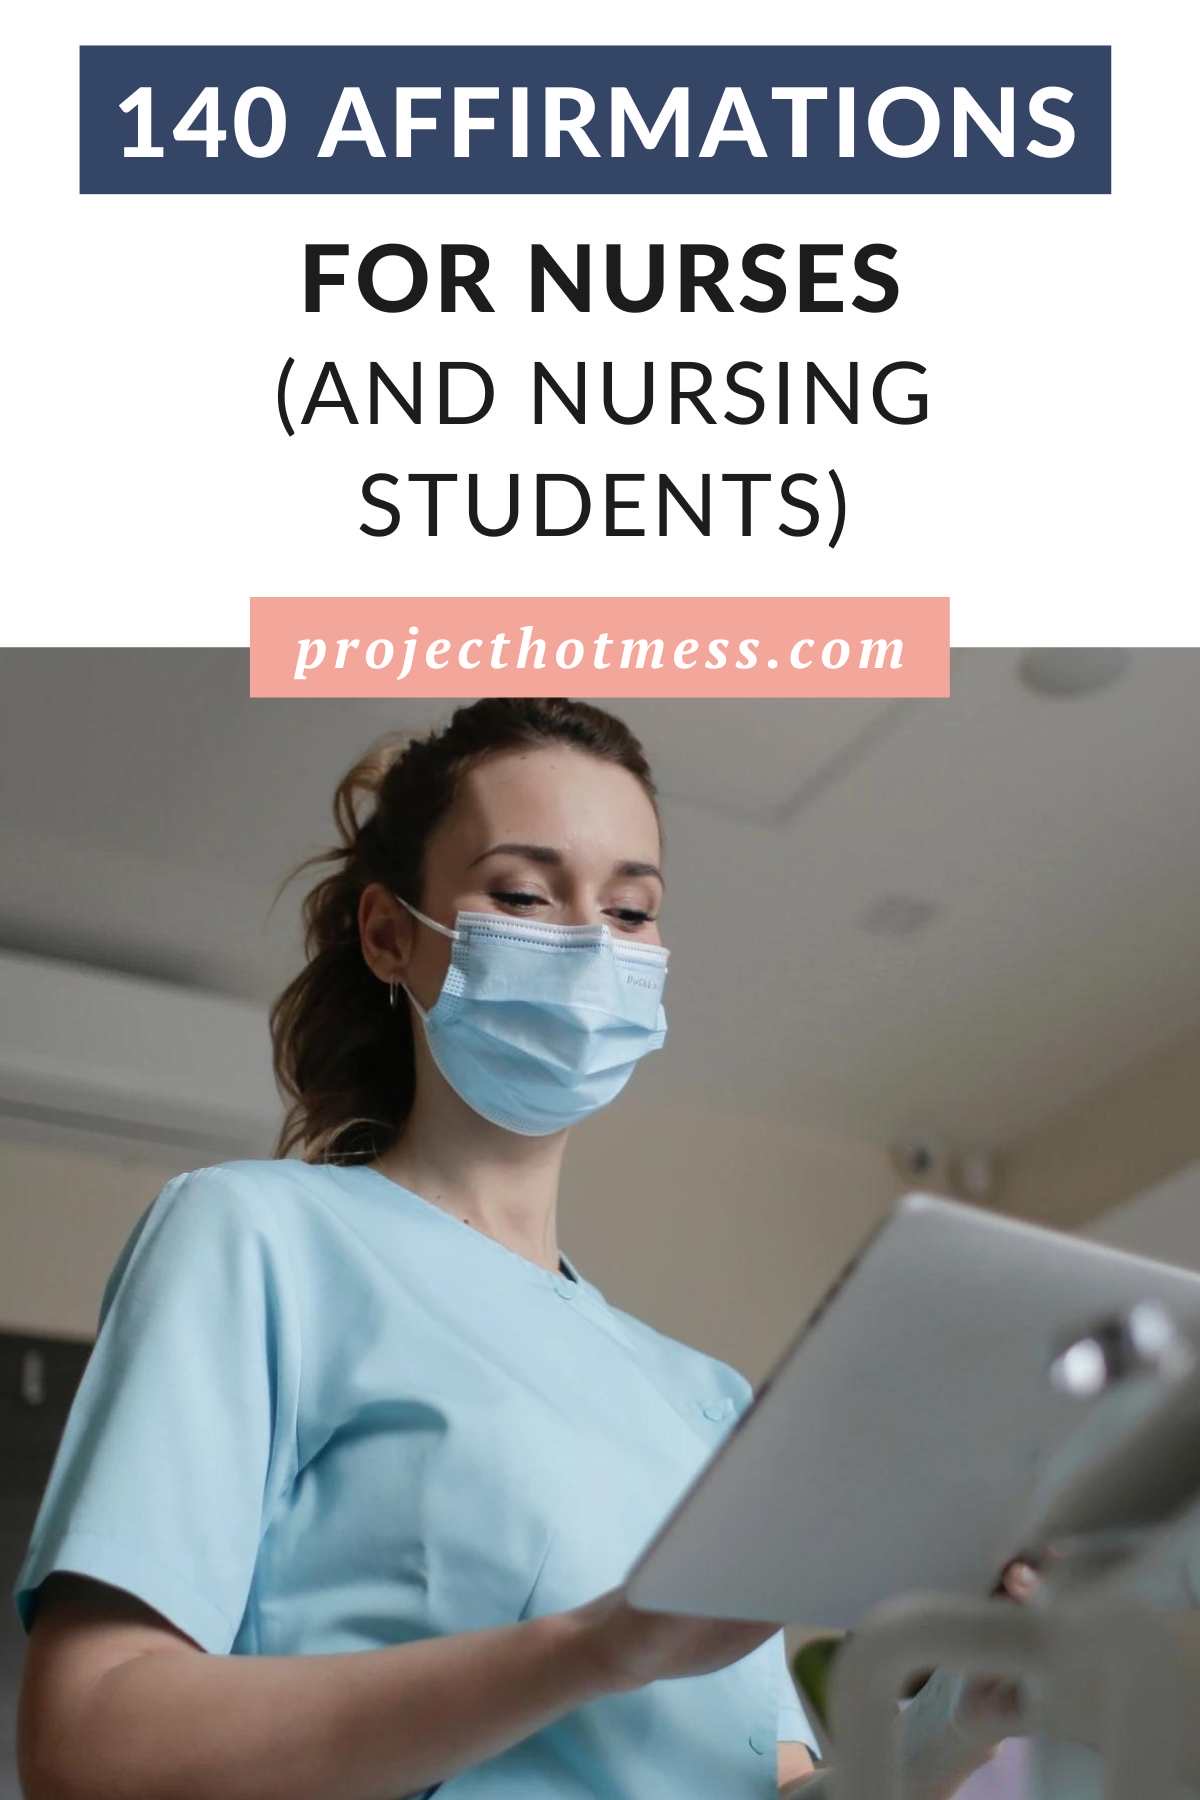 This collection of 140 affirmations for nurses and nursing students, is designed to help you stay focused, motivated, and inspired during your shift, while also reminding you to take care of yourself, and to build your confidence. We appreciate nurses and all they do.